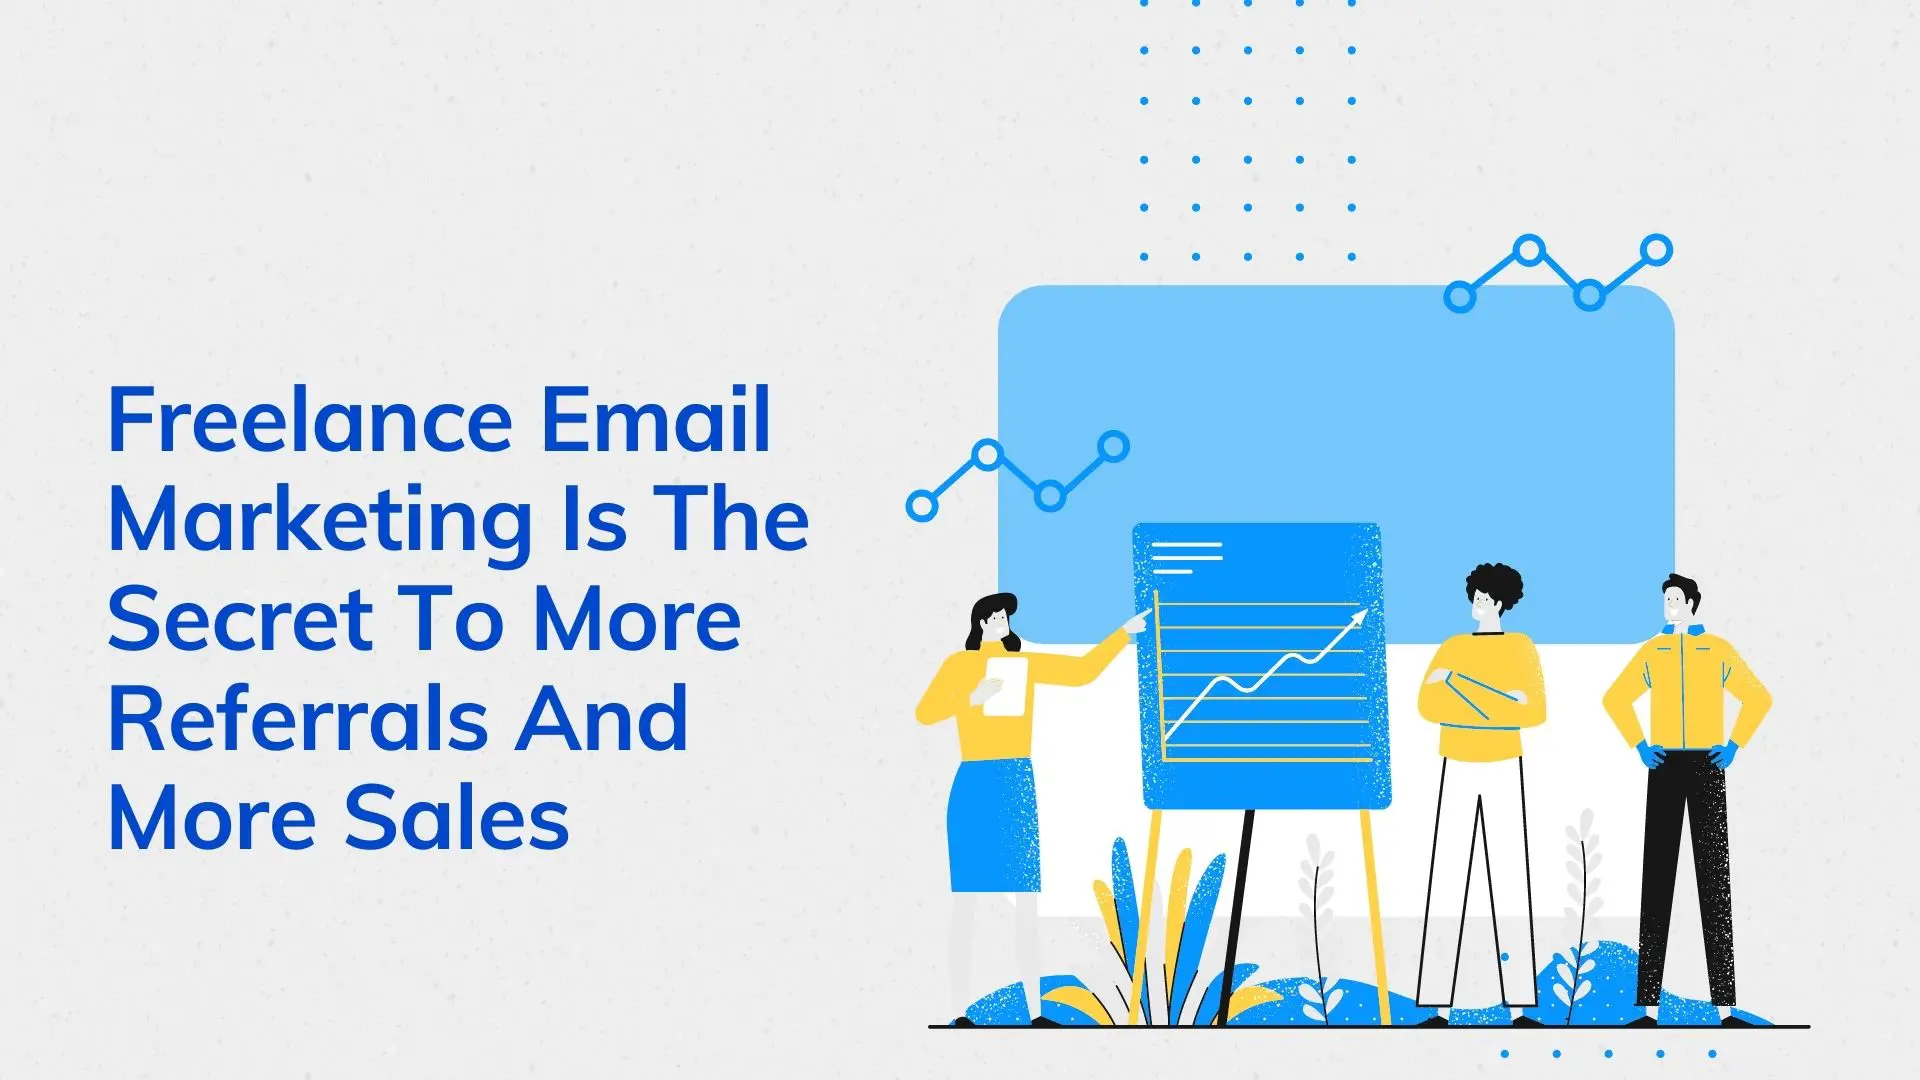 Freelance Email Marketing Is The Secret To More Referrals And More Sales